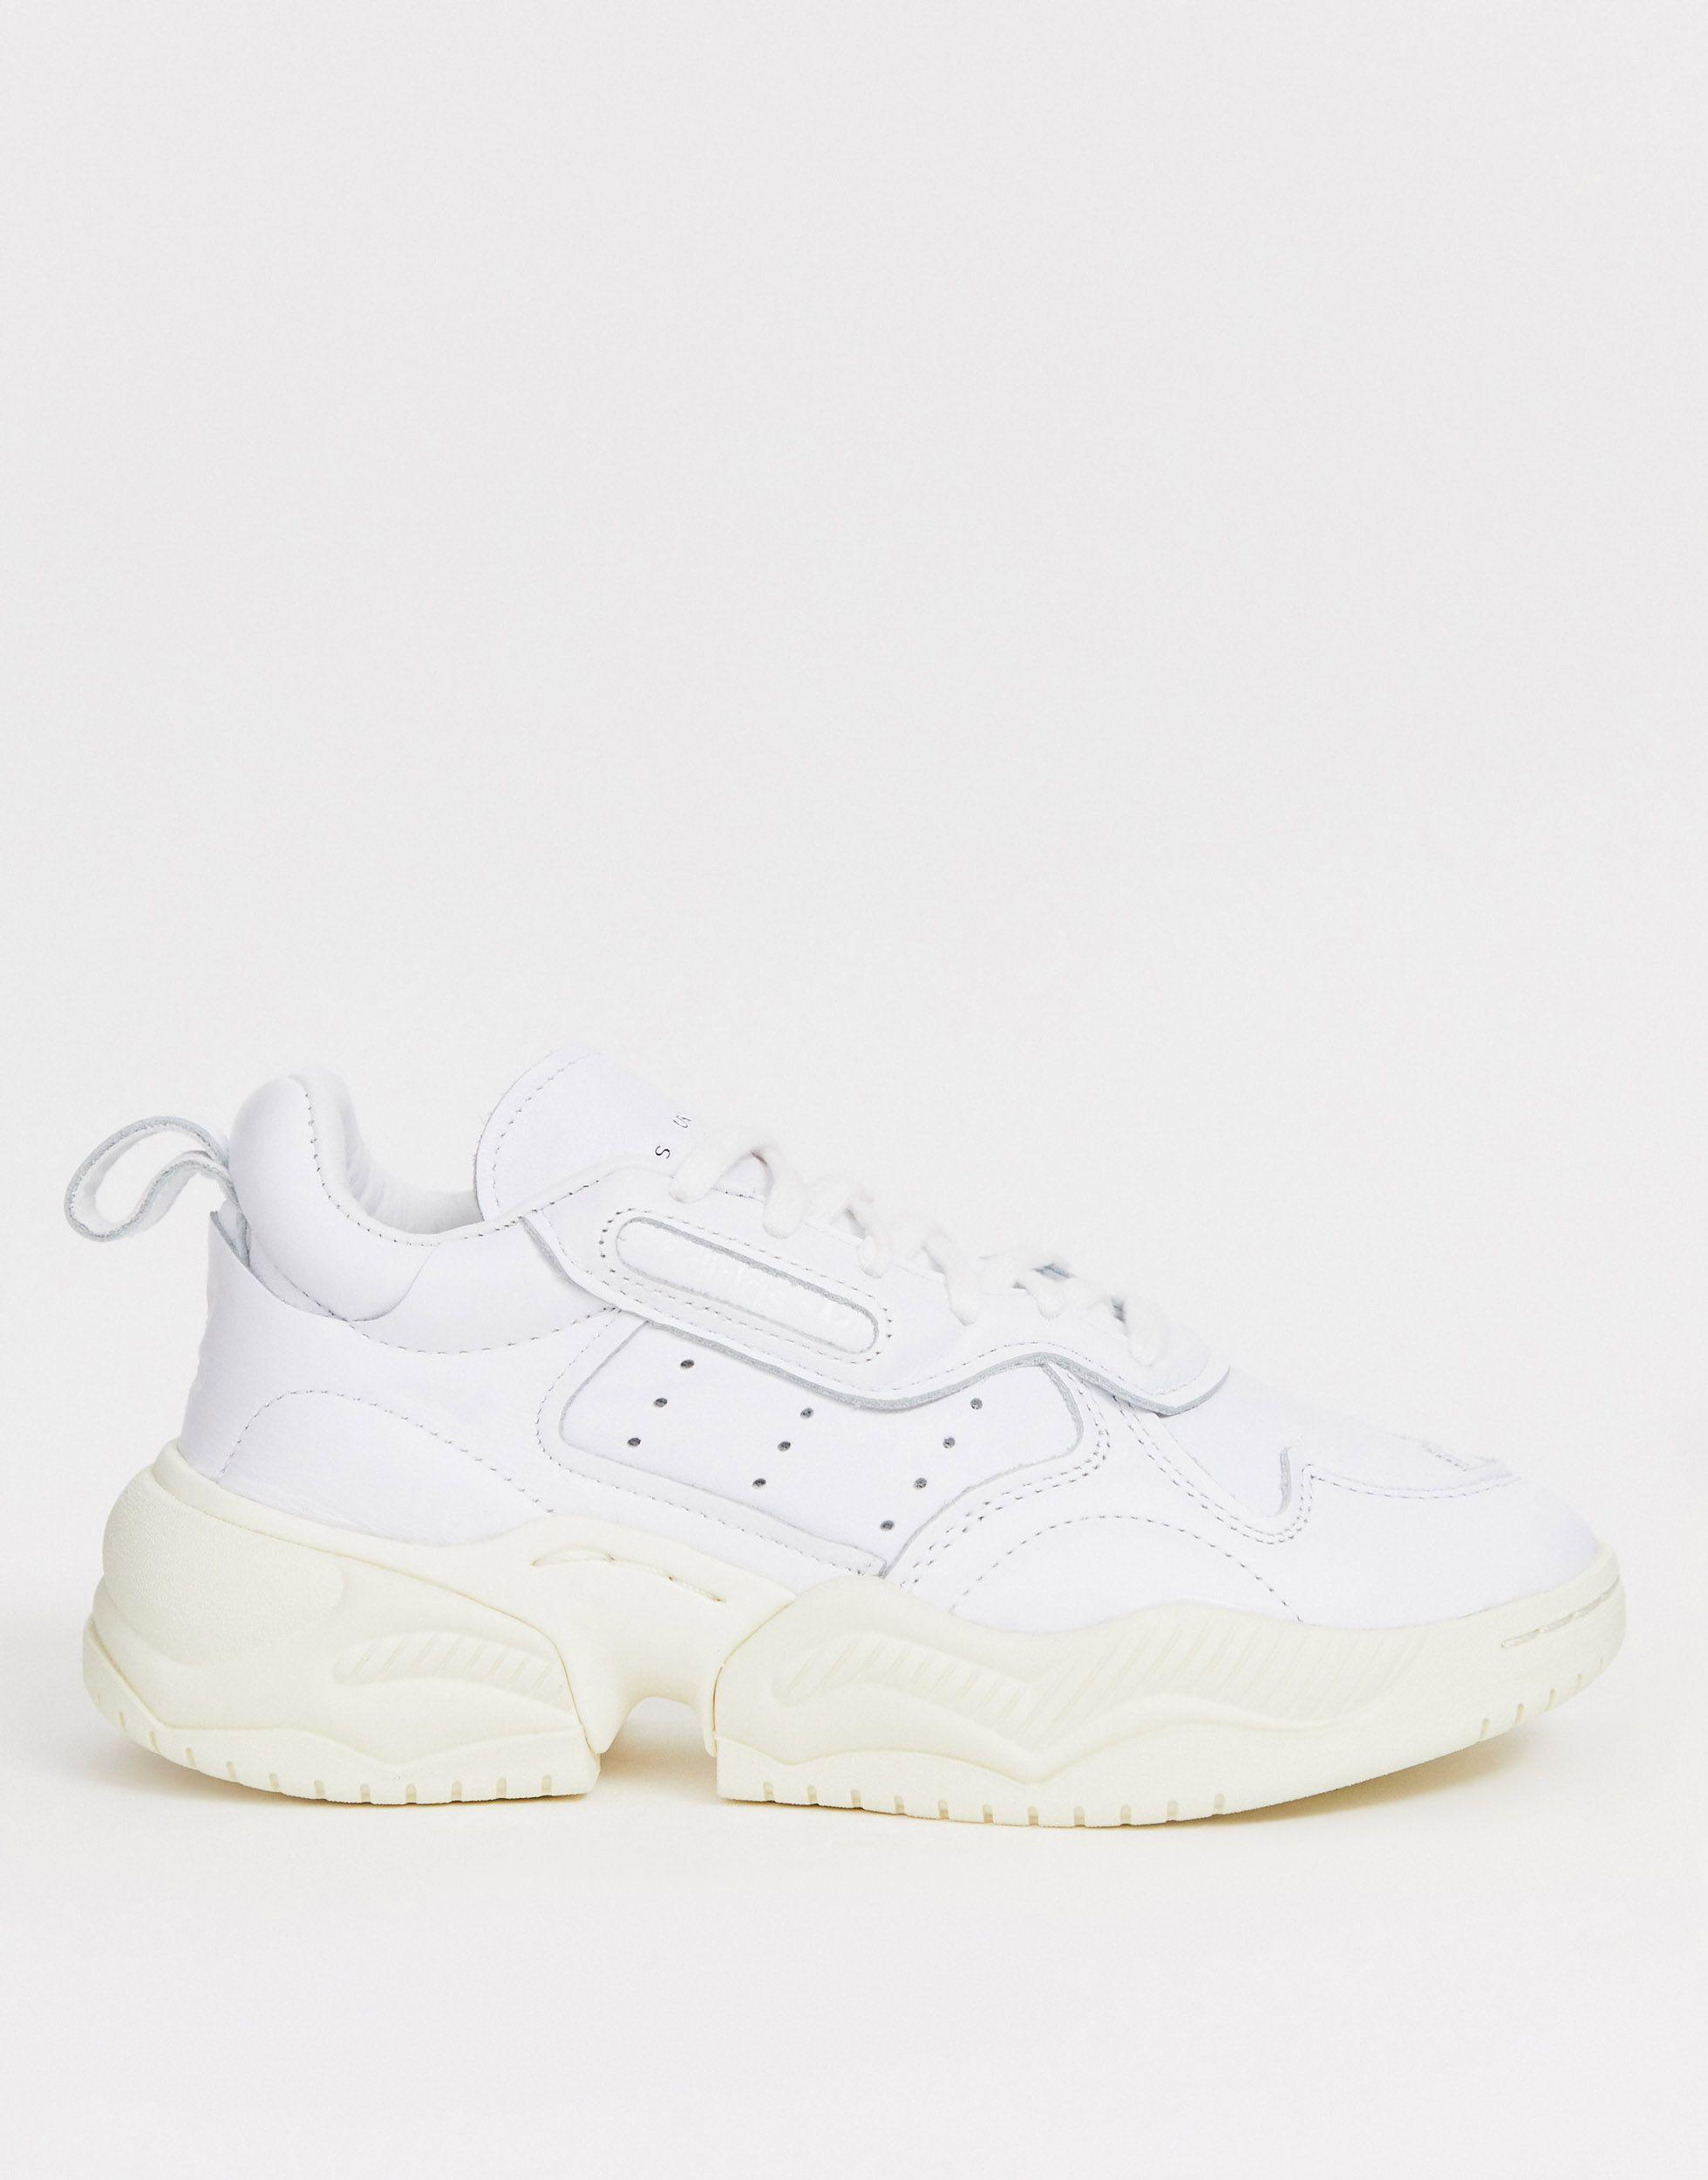 adidas Originals Leather Supercourt Rx Trainers In White | Lyst